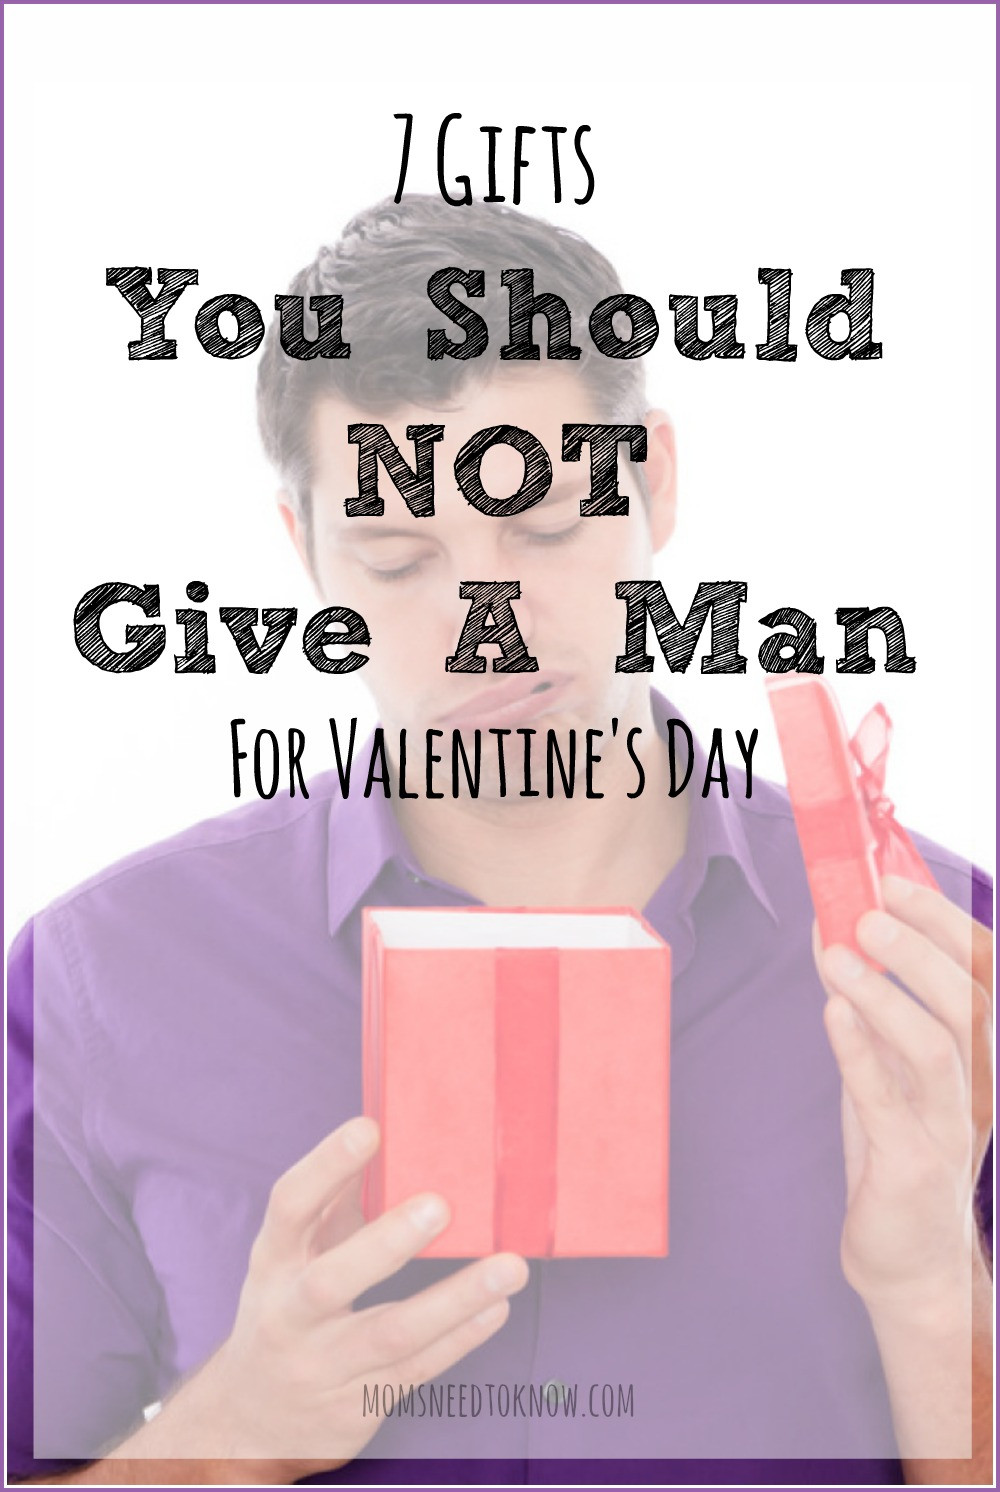 Valentine Gift Ideas For A Male Friend
 The 7 Gifts You Should Never Buy a Man For Valentines Day